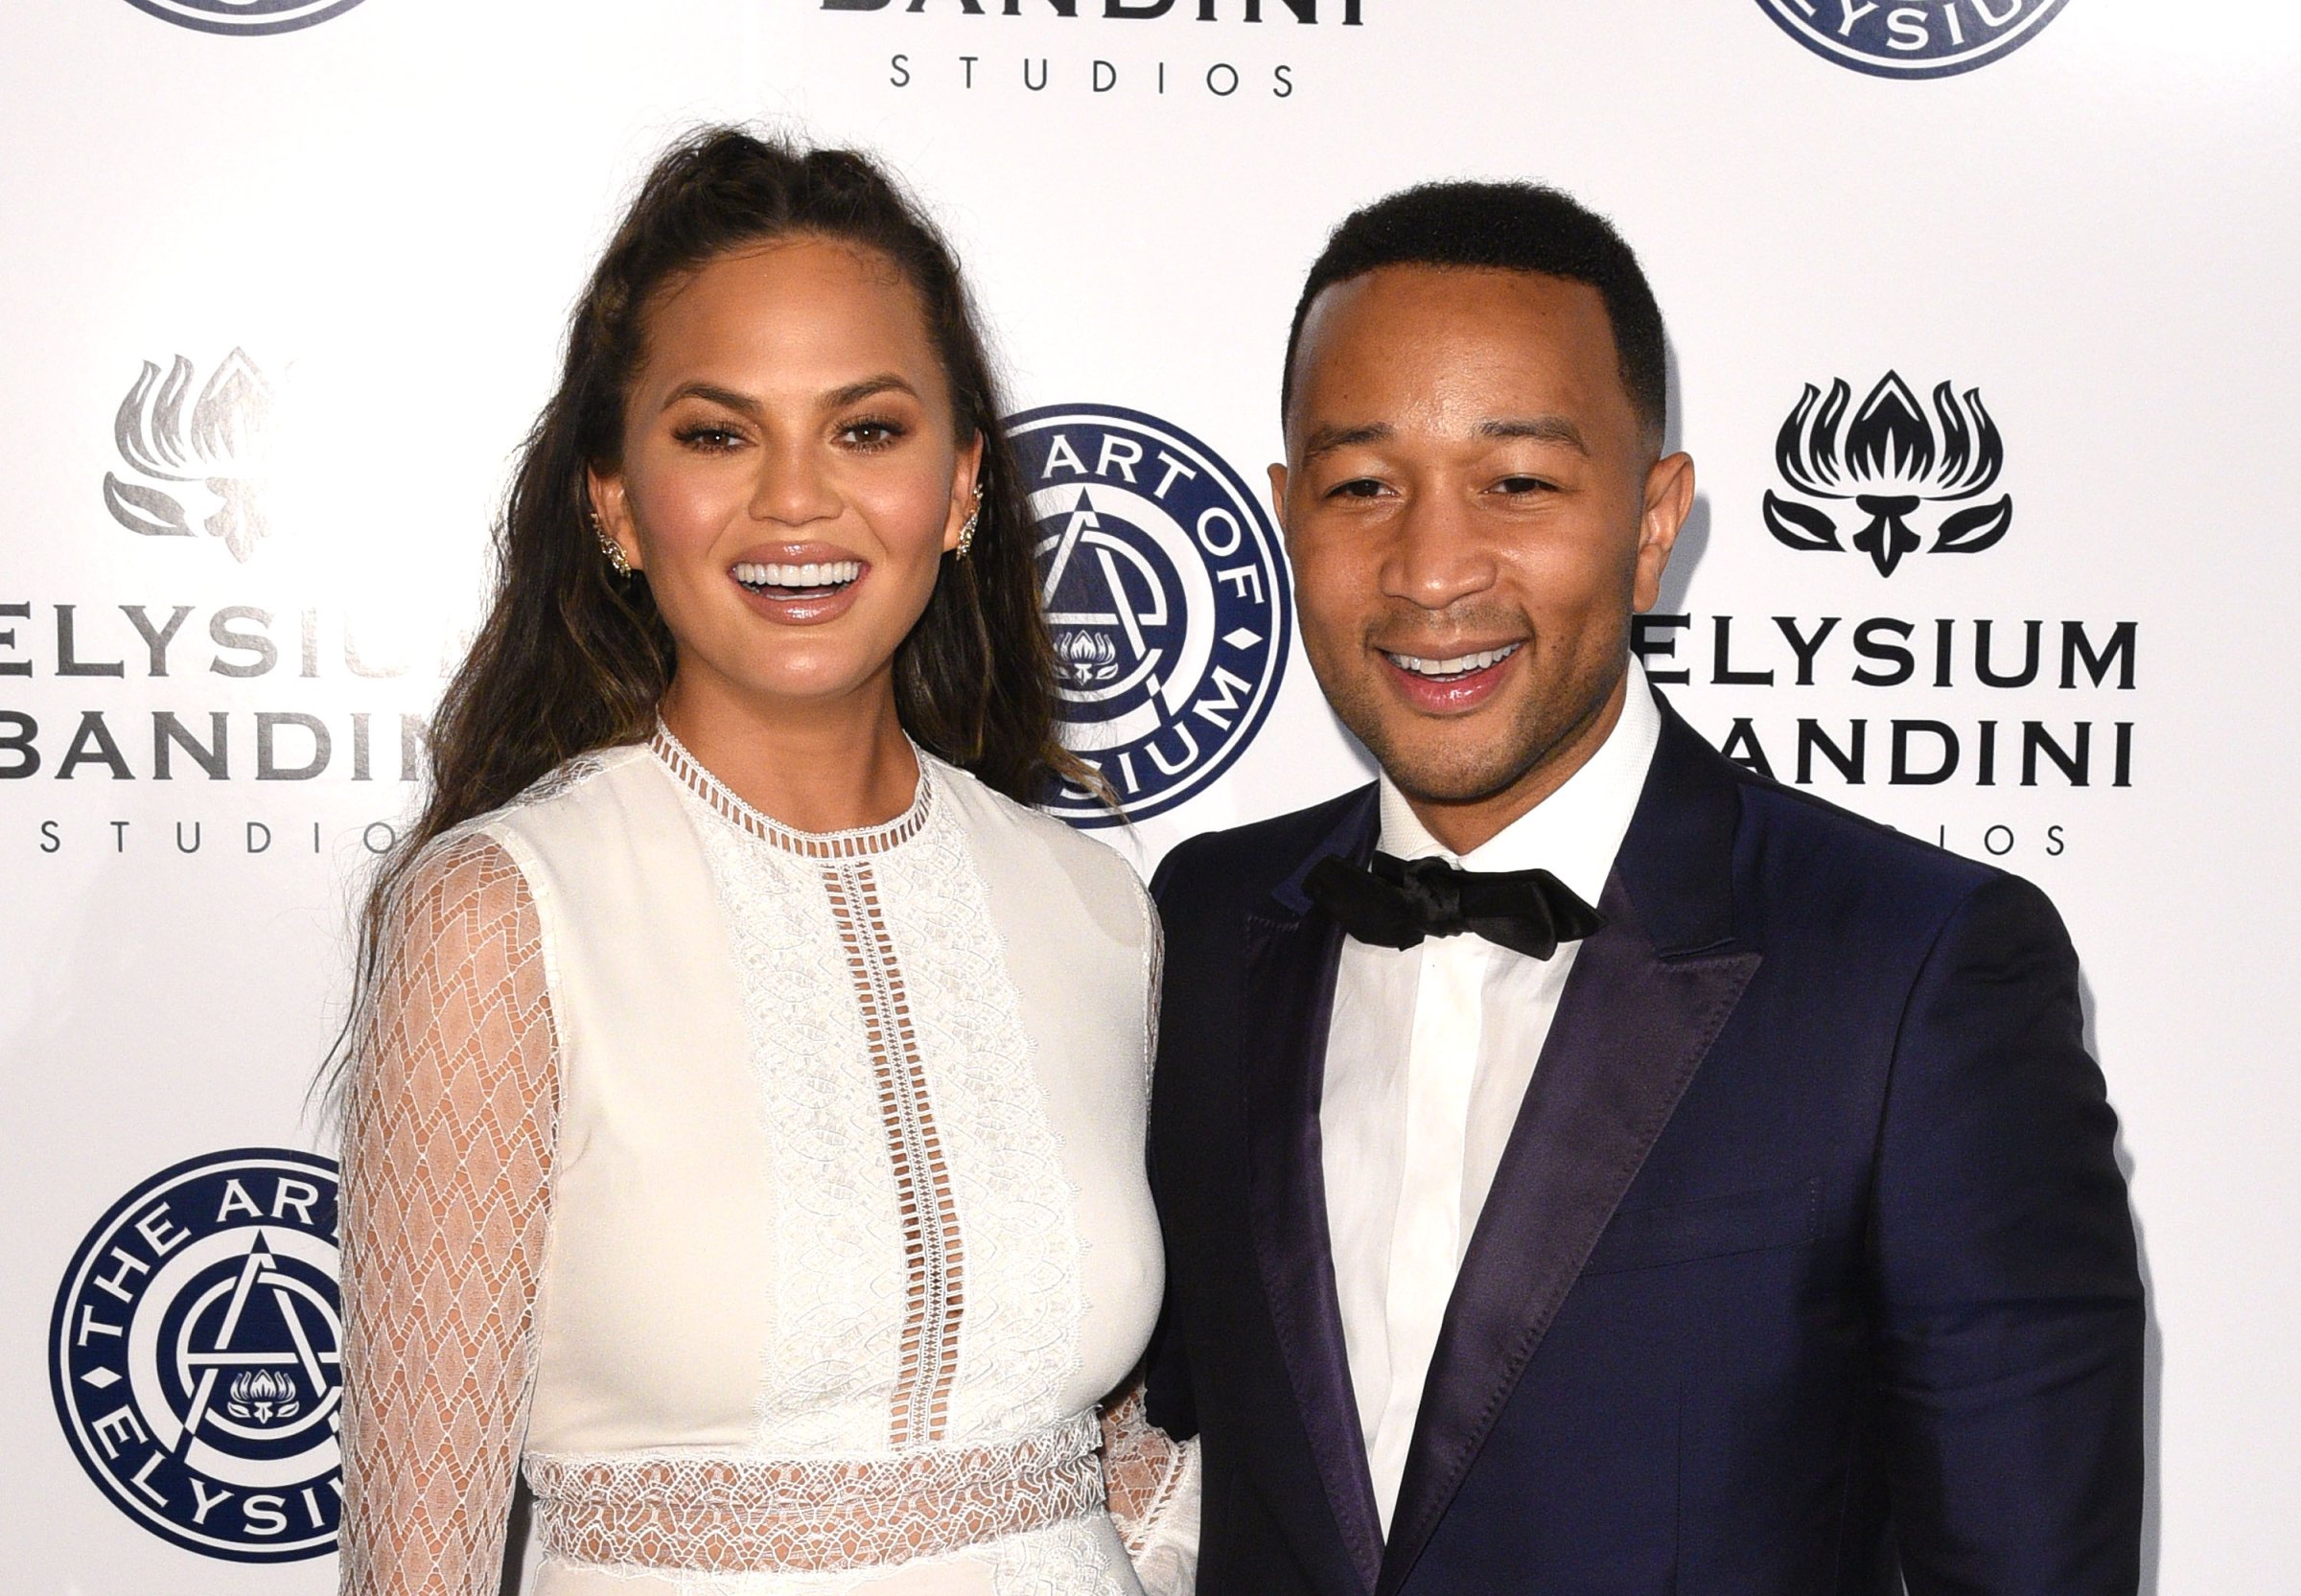 Model Chrissy Teigen (L) and recording artist John Legend attend The Art of Elysium presents Stevie Wonder's HEAVEN - Celebrating the 10th Anniversary at Red Studios on January 7, 2017 in Los Angeles, California.